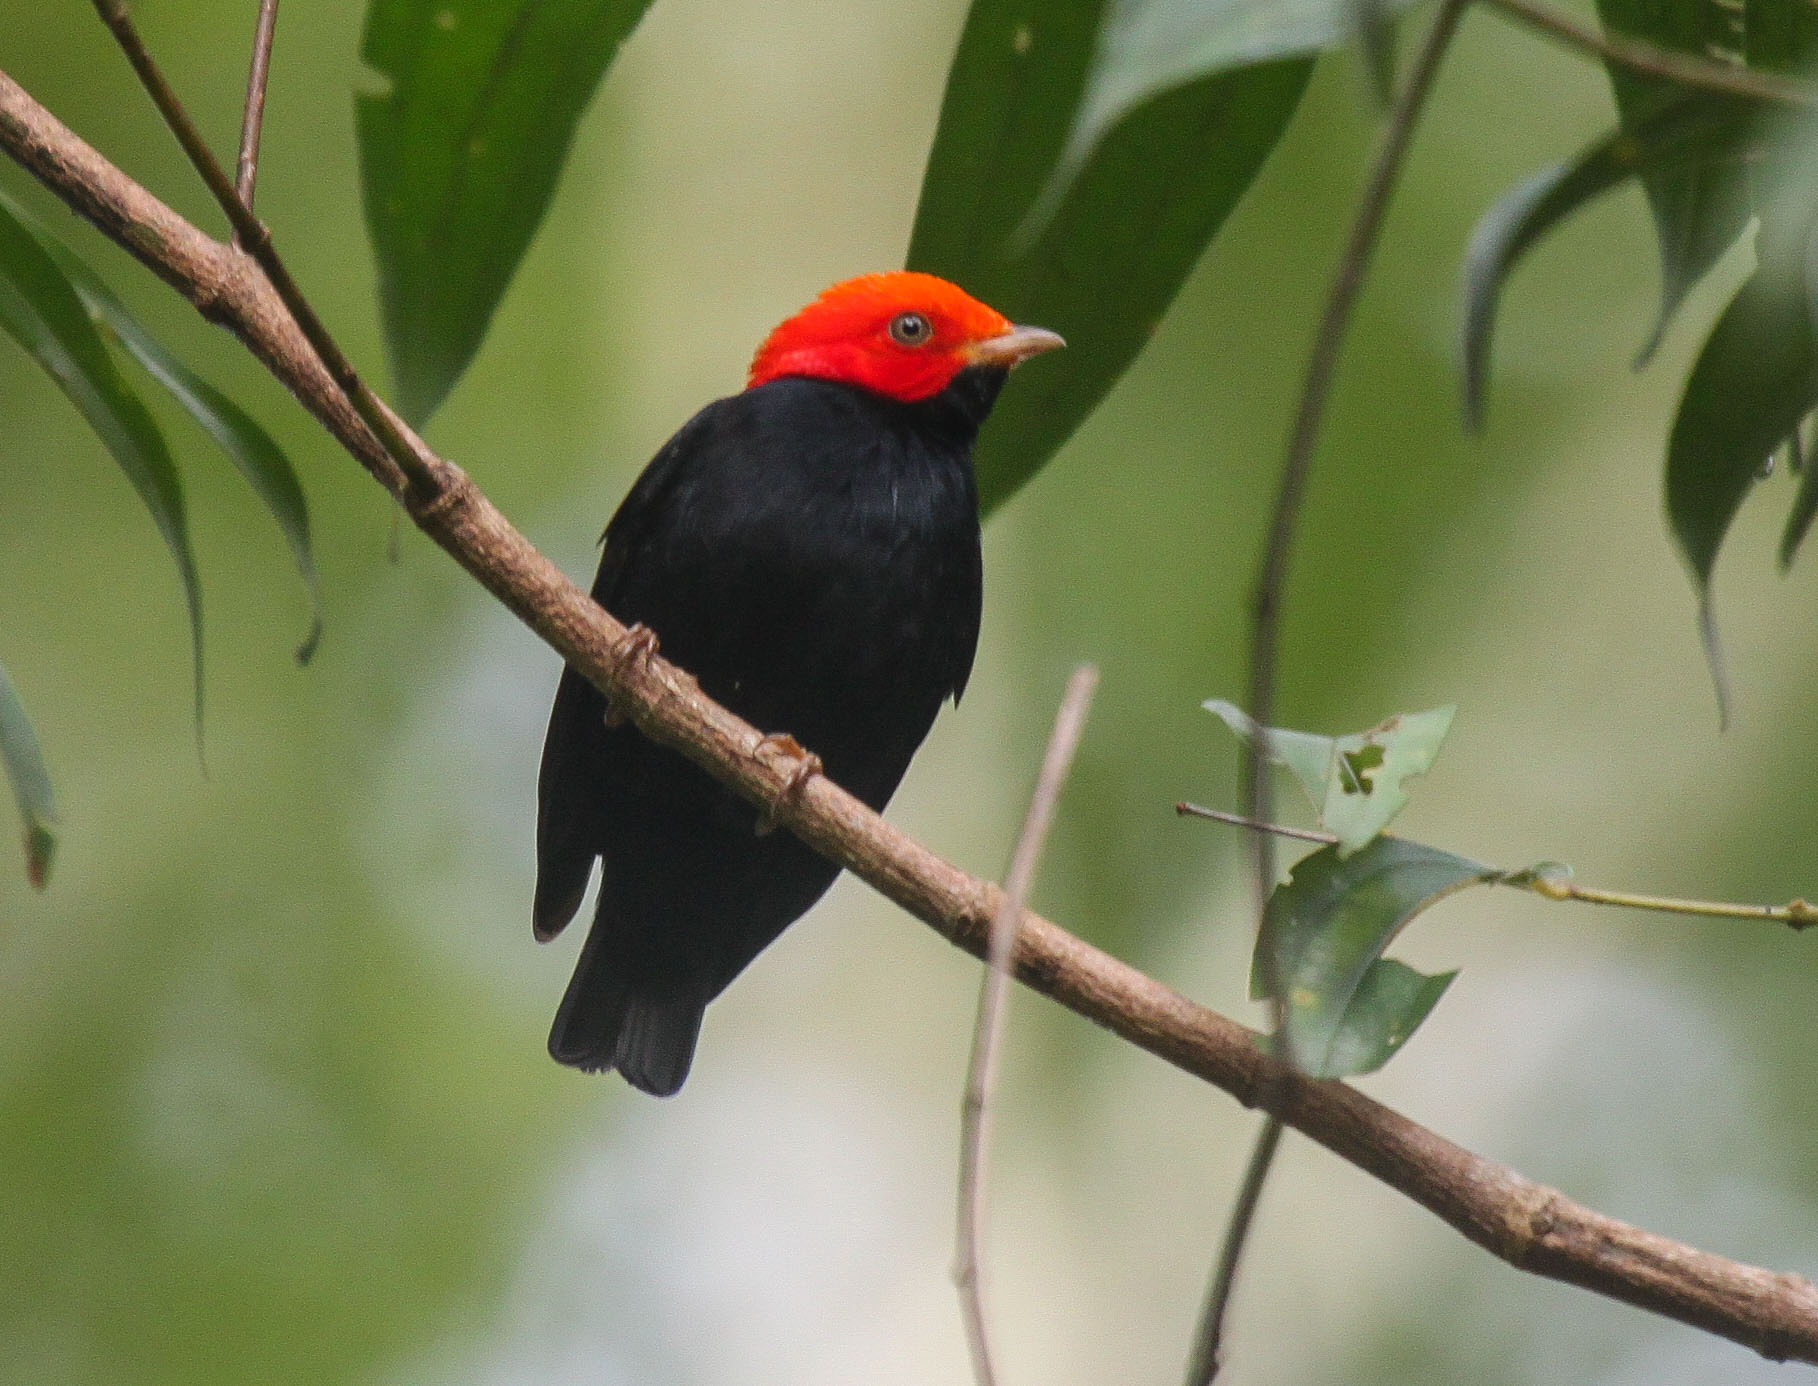 A male Red-headed Manakin perched on a branch